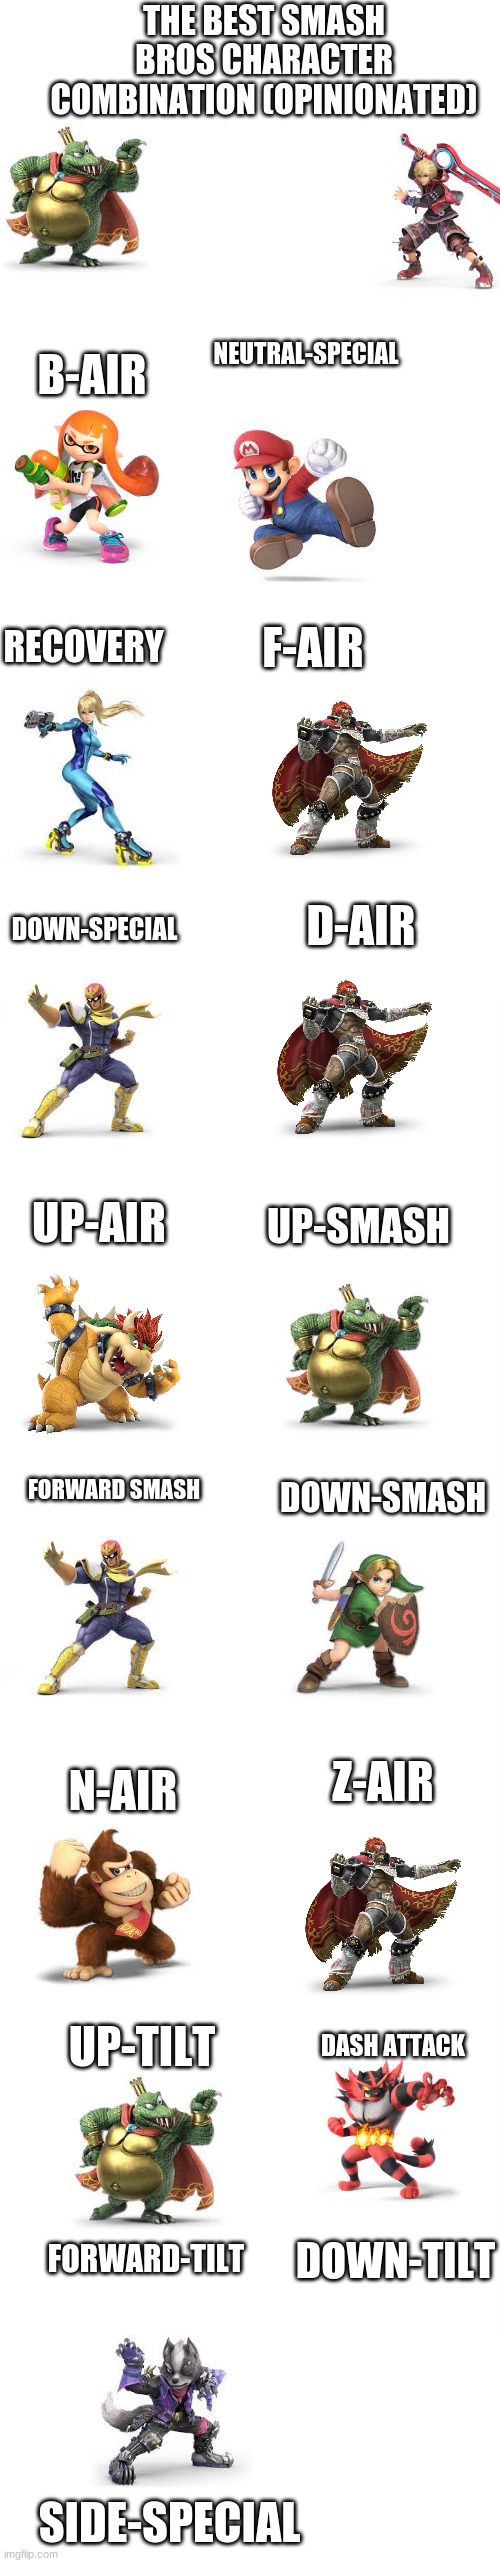 My Best Smash Bros Moveset Combination | THE BEST SMASH BROS CHARACTER COMBINATION (OPINIONATED); NEUTRAL-SPECIAL; B-AIR; RECOVERY; F-AIR; DOWN-SPECIAL; D-AIR; UP-AIR; UP-SMASH; FORWARD SMASH; DOWN-SMASH; Z-AIR; N-AIR; UP-TILT; DASH ATTACK; DOWN-TILT; FORWARD-TILT; SIDE-SPECIAL | image tagged in memes,controversial | made w/ Imgflip meme maker